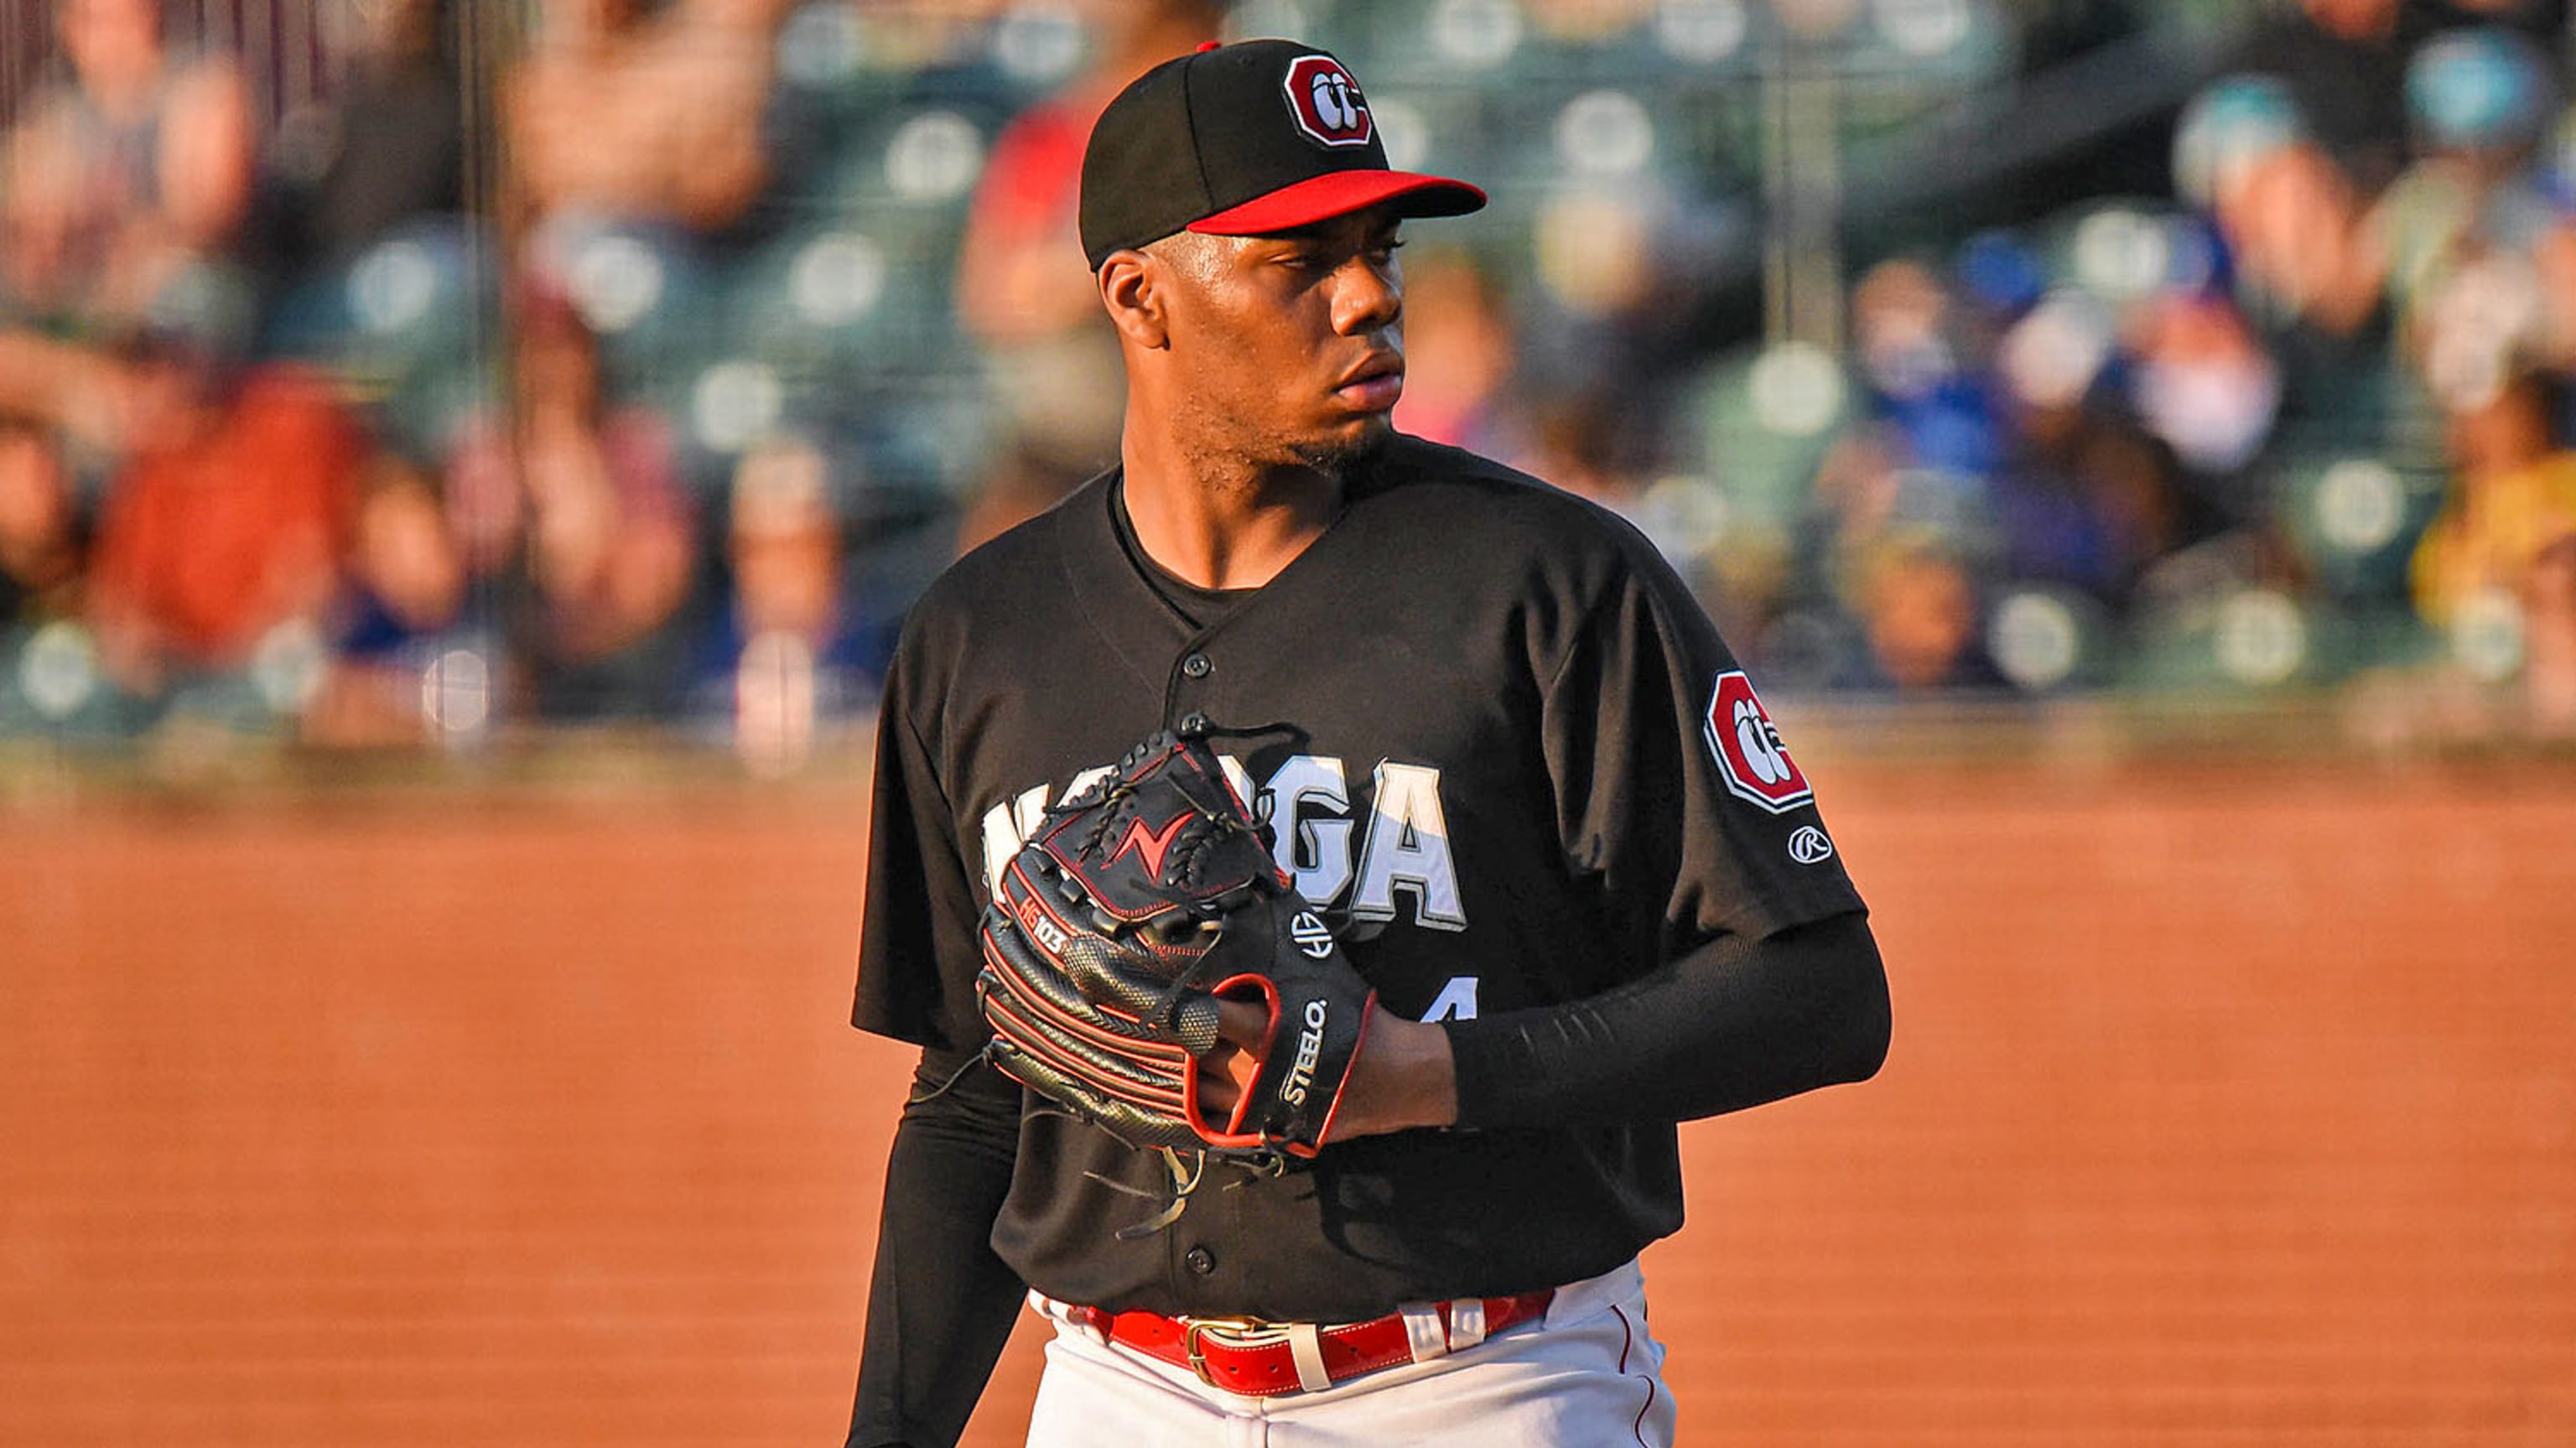 Hunter Greene working on changeup for 2023 with Cincinnati Reds